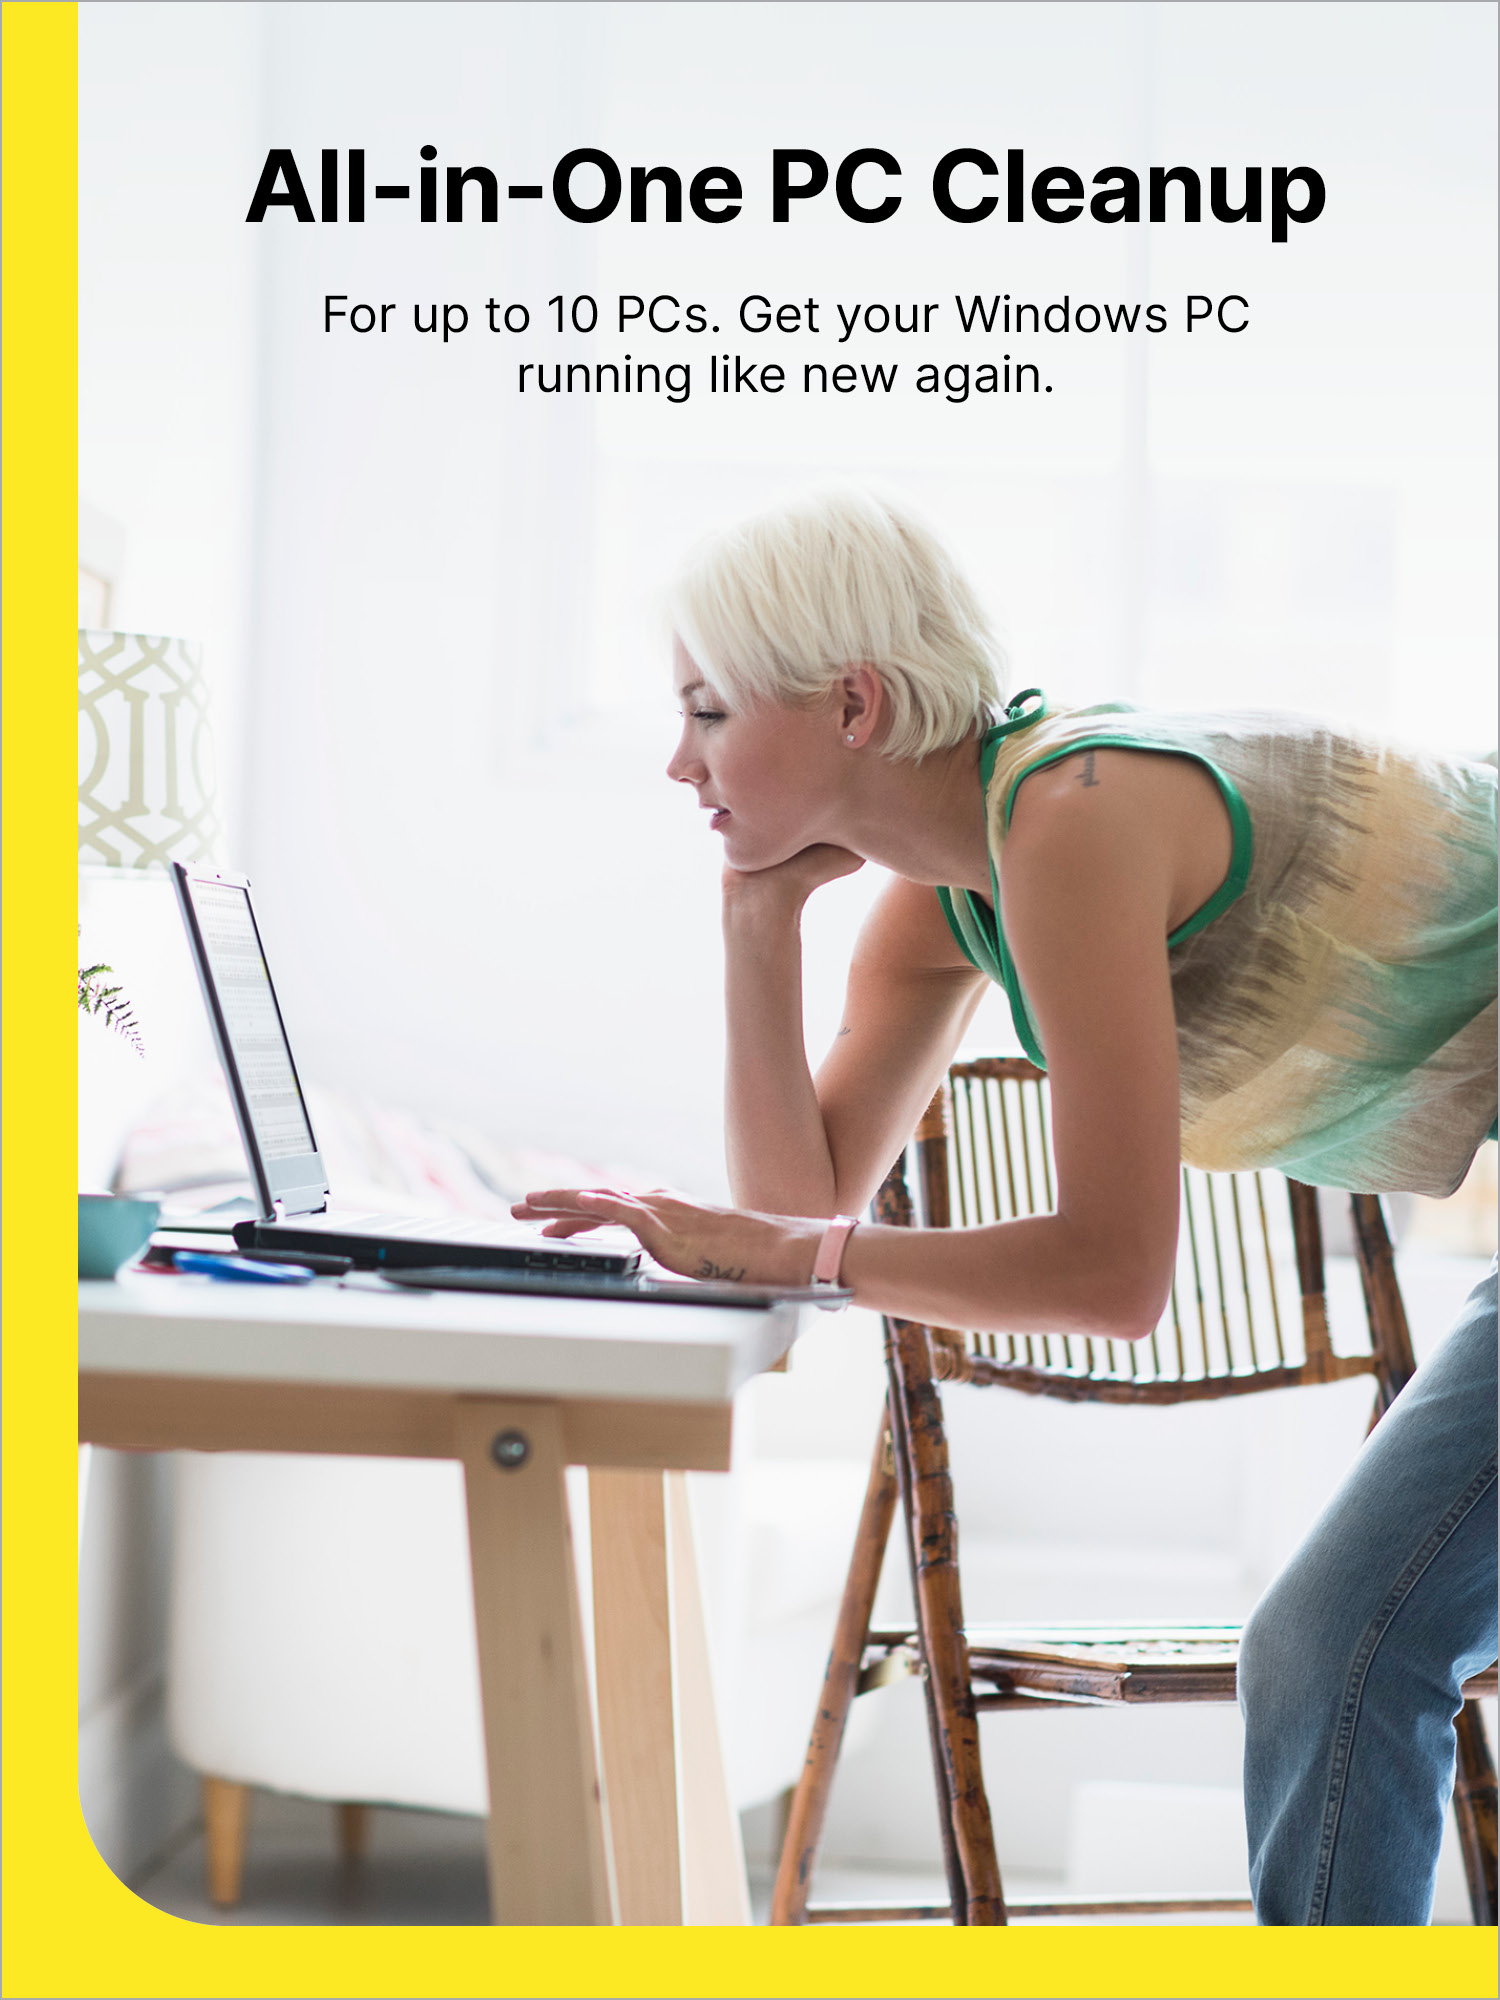 Norton Utilities Ultimate, Cleans and speeds up your PC, 1 Year Subscription, Windows PC only, for up to 10 PCs [Digital Download] - image 2 of 6